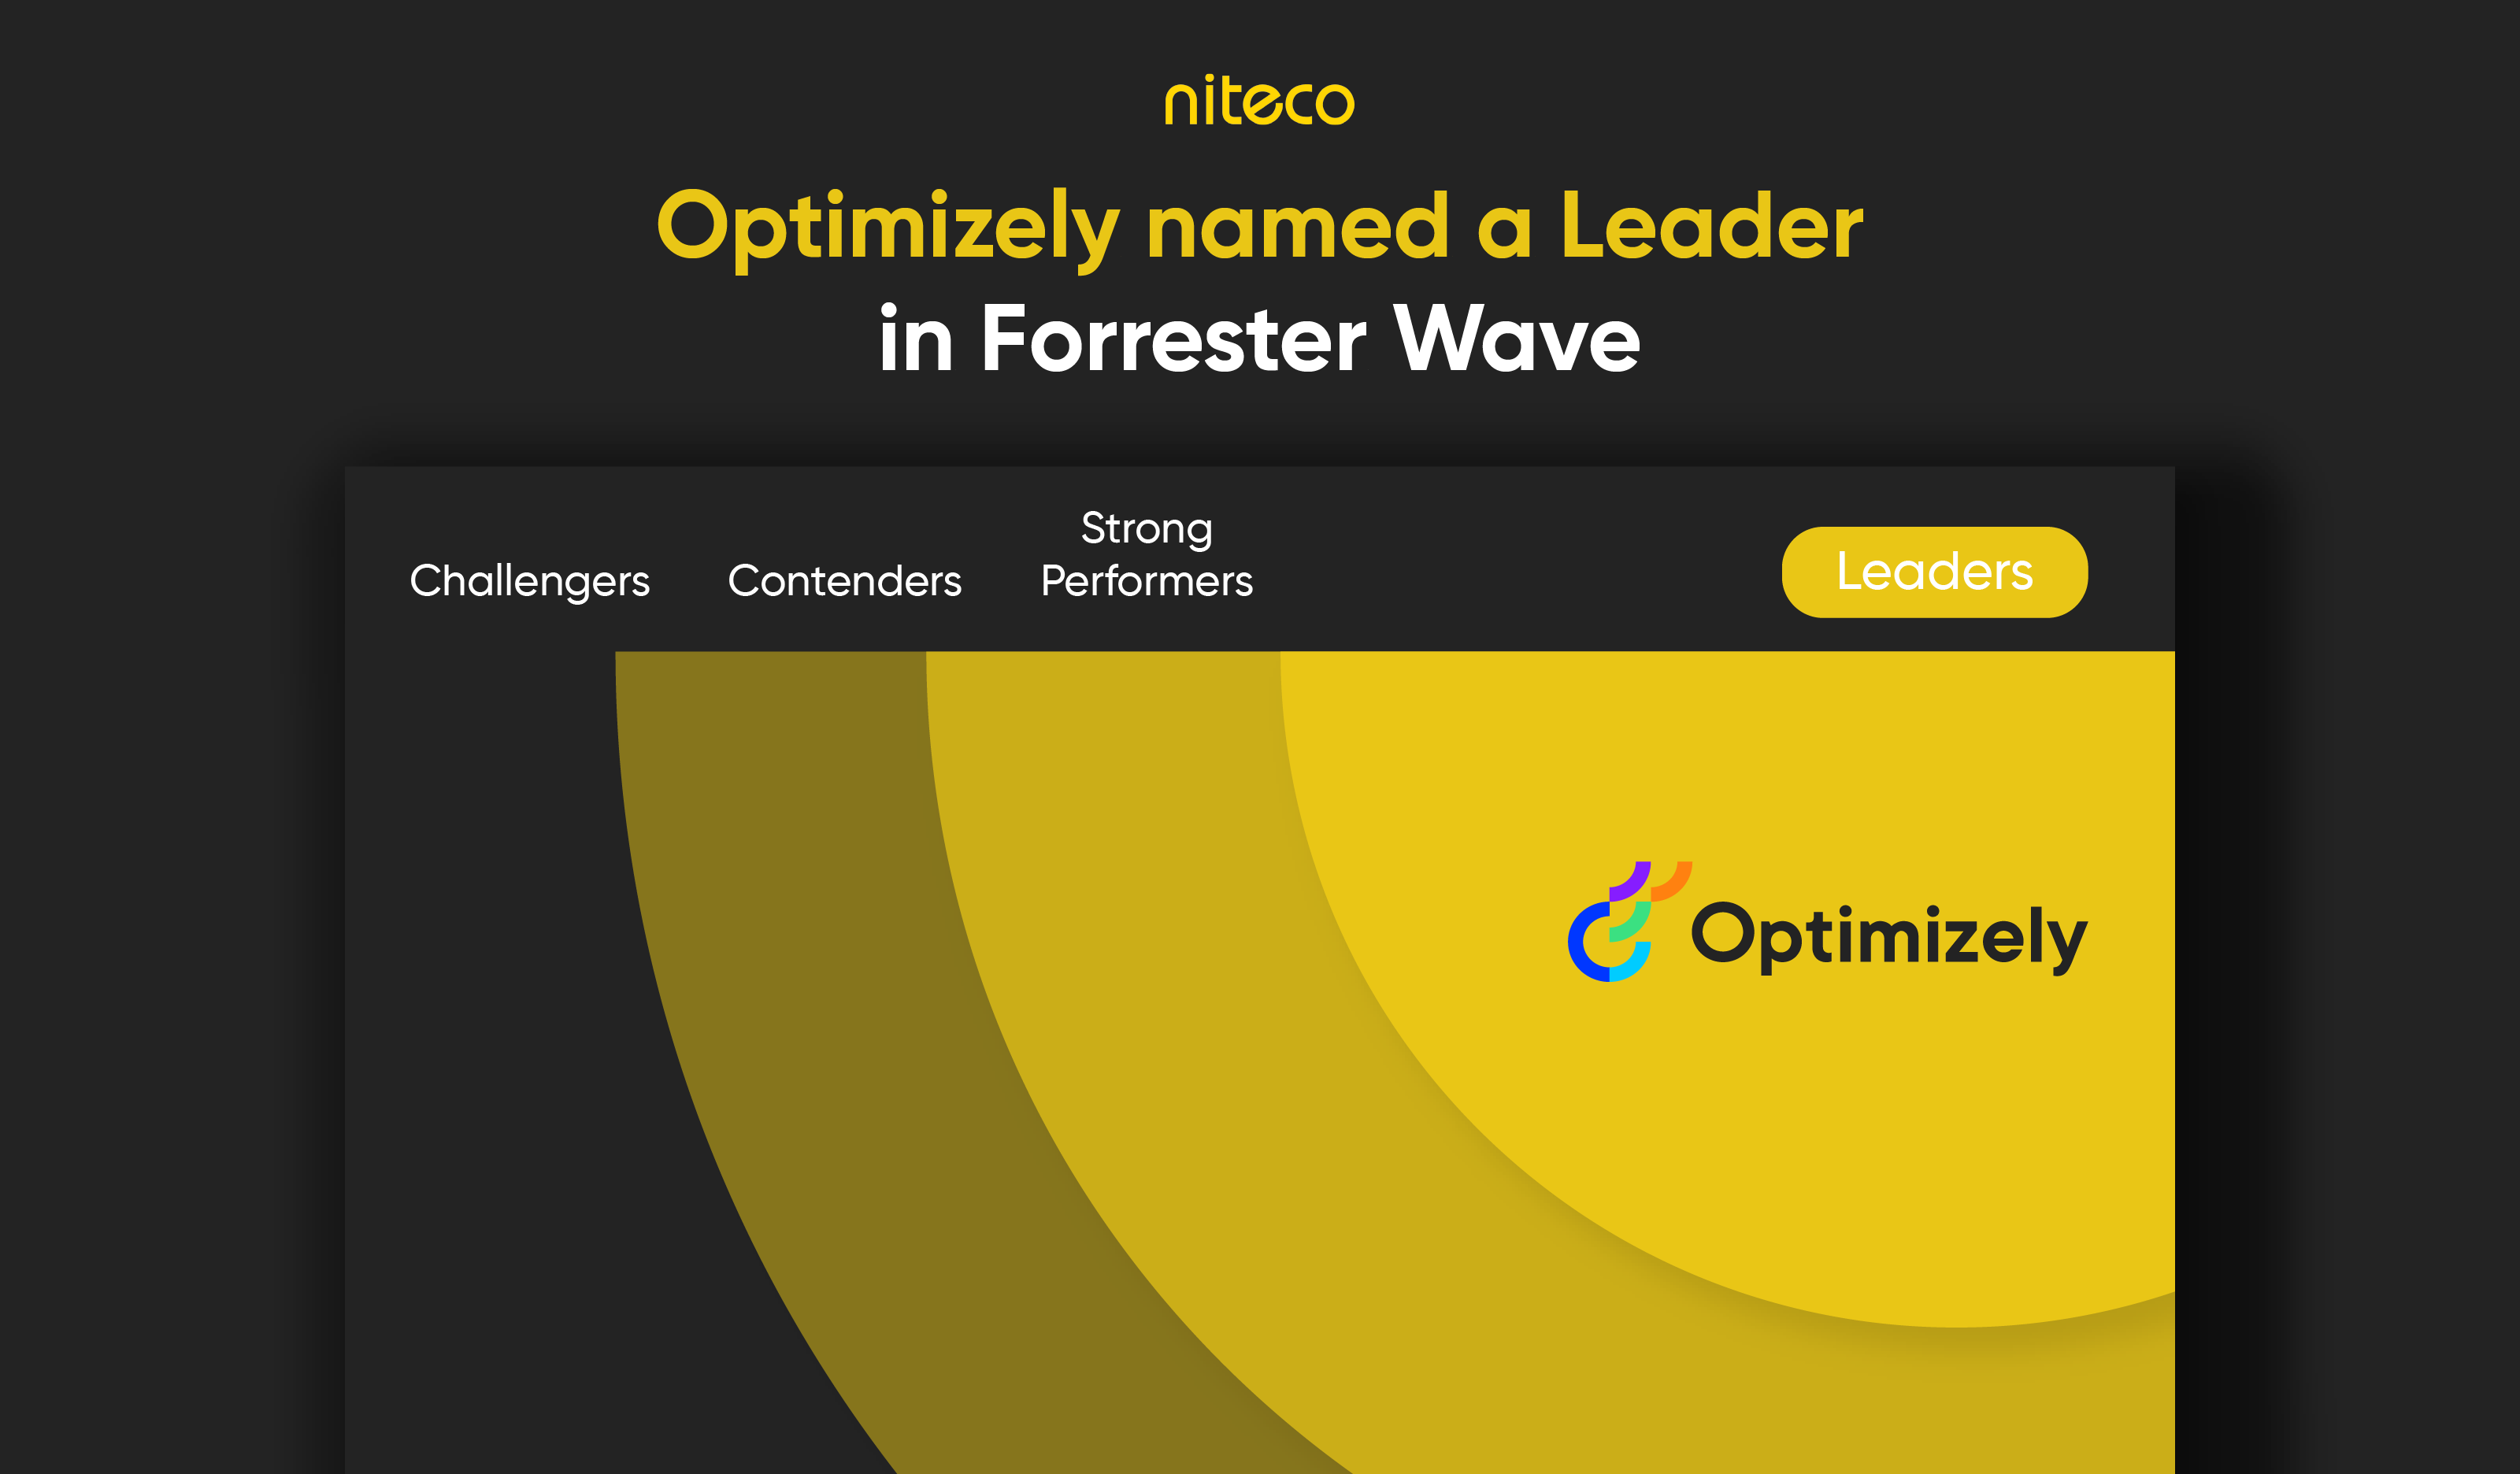 Optimizely named a Leader in Forrester Wave Content Management Systems